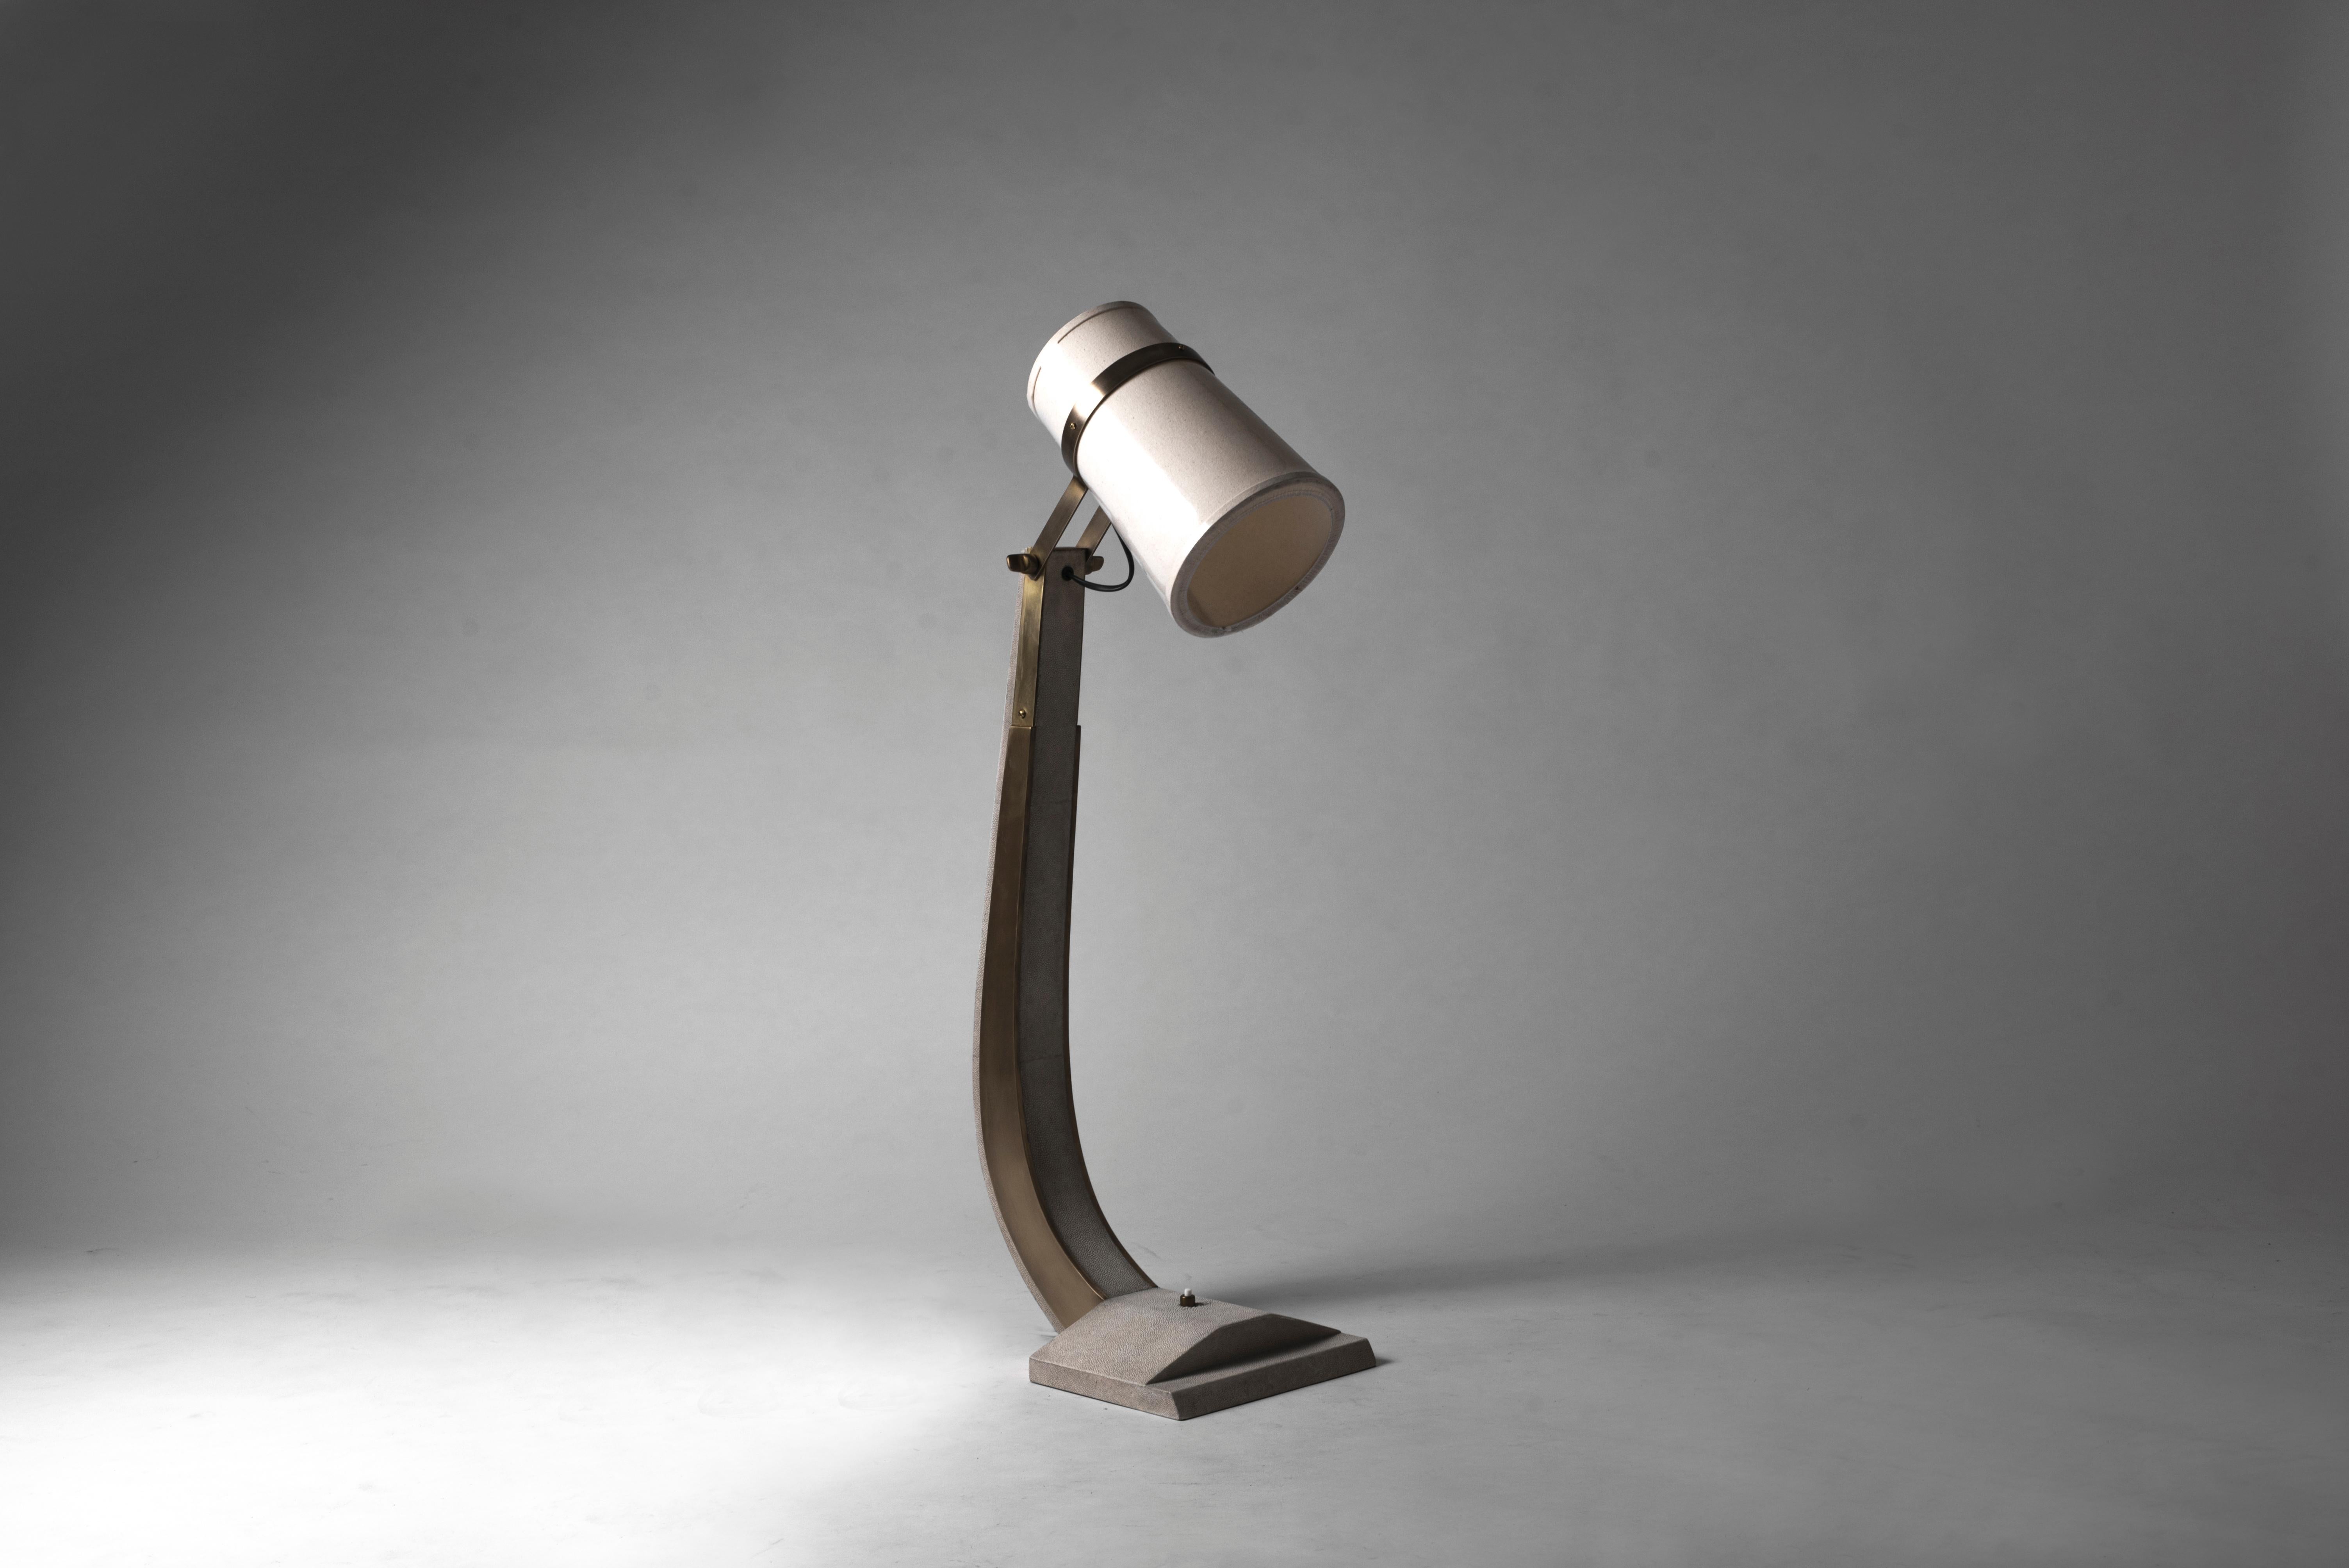 The desk lamp in cream shagreen and bronze patina brass by R&Y Augousti is a beautiful piece to add elegance to any tabletop. 

The dimensions of this piece are 9